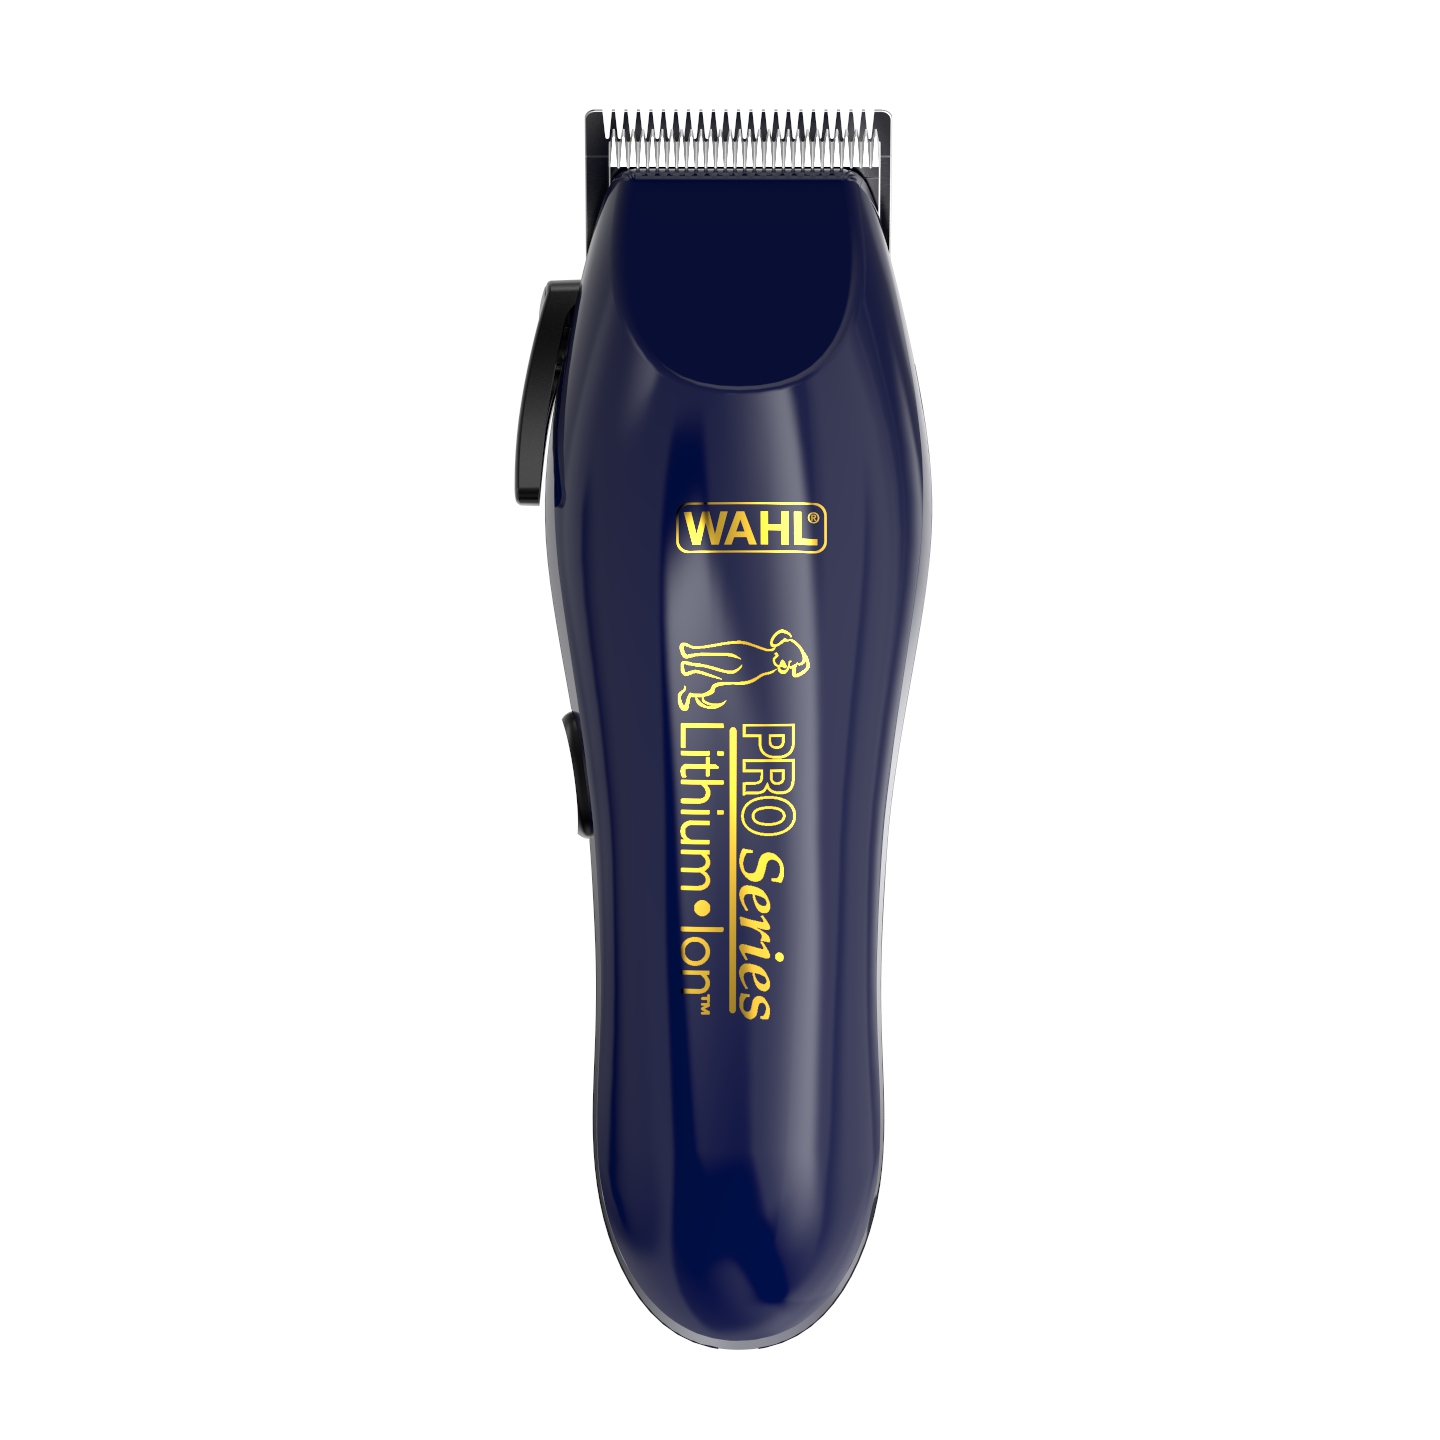 wahl lithium ion pro men's cordless haircut kit with finishing trimmer